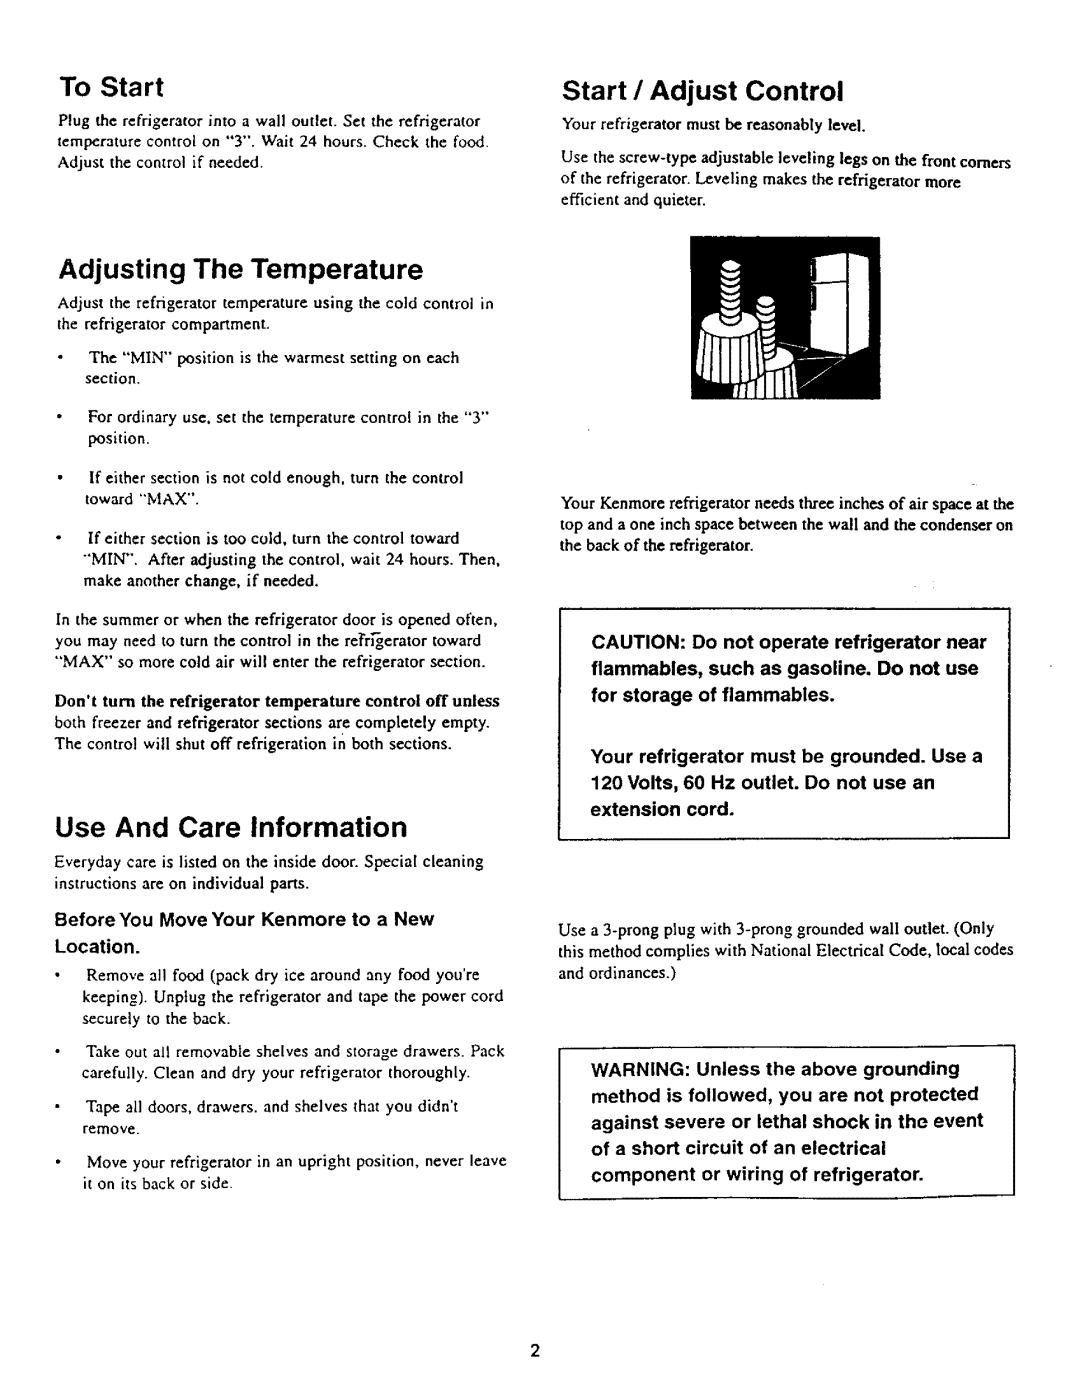 Kenmore 61042, 61044, 61040, 61047 Use And Care Information, To Start, Start 1 Adjust Control, Adjusting The Temperature 